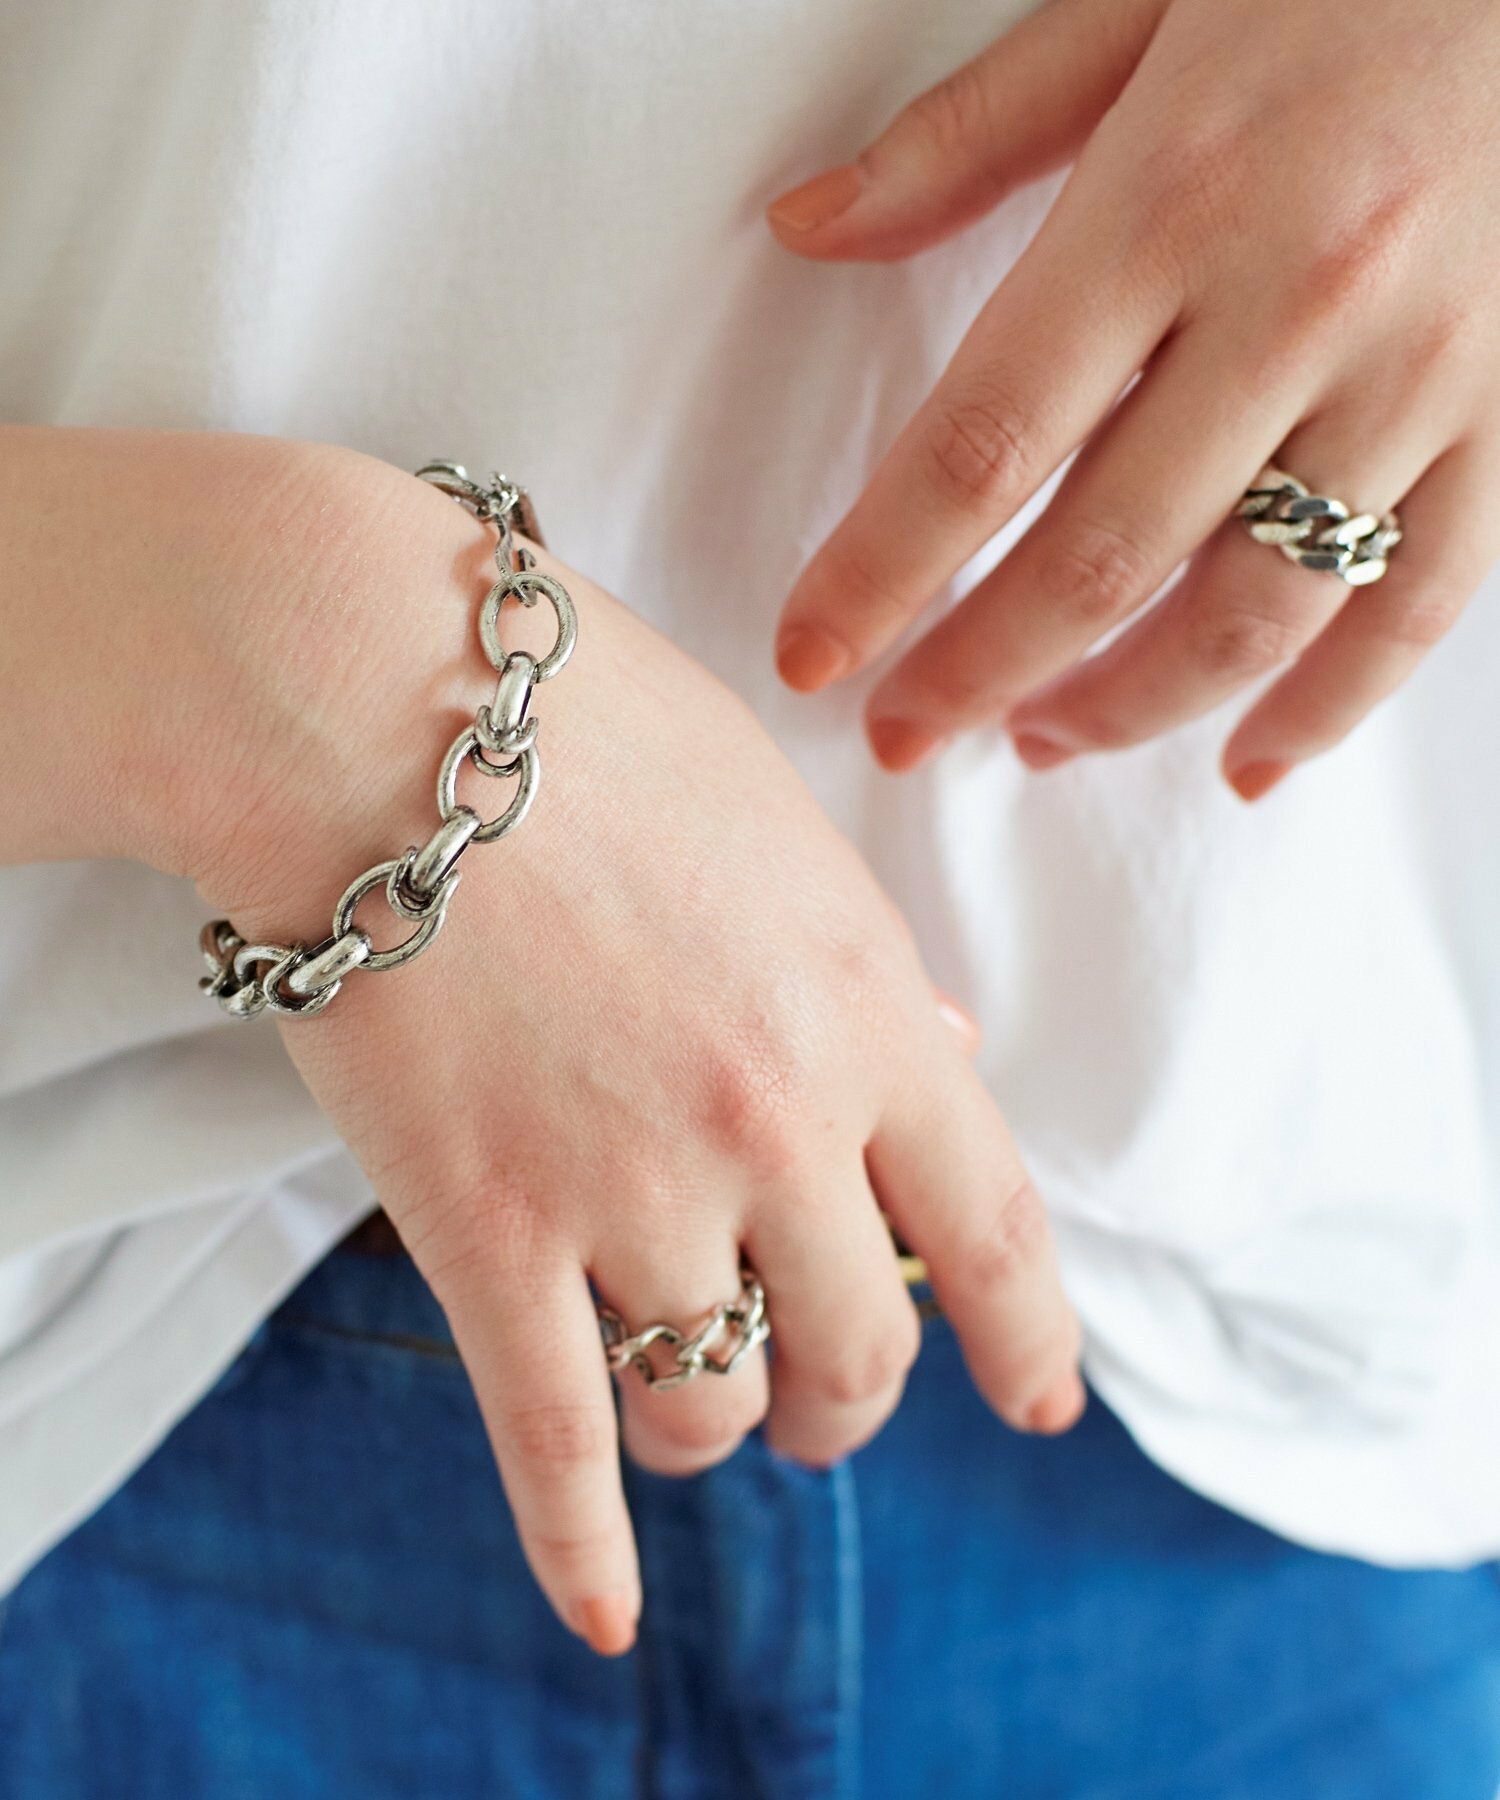 Nothing And Others/Ink chain Ring set